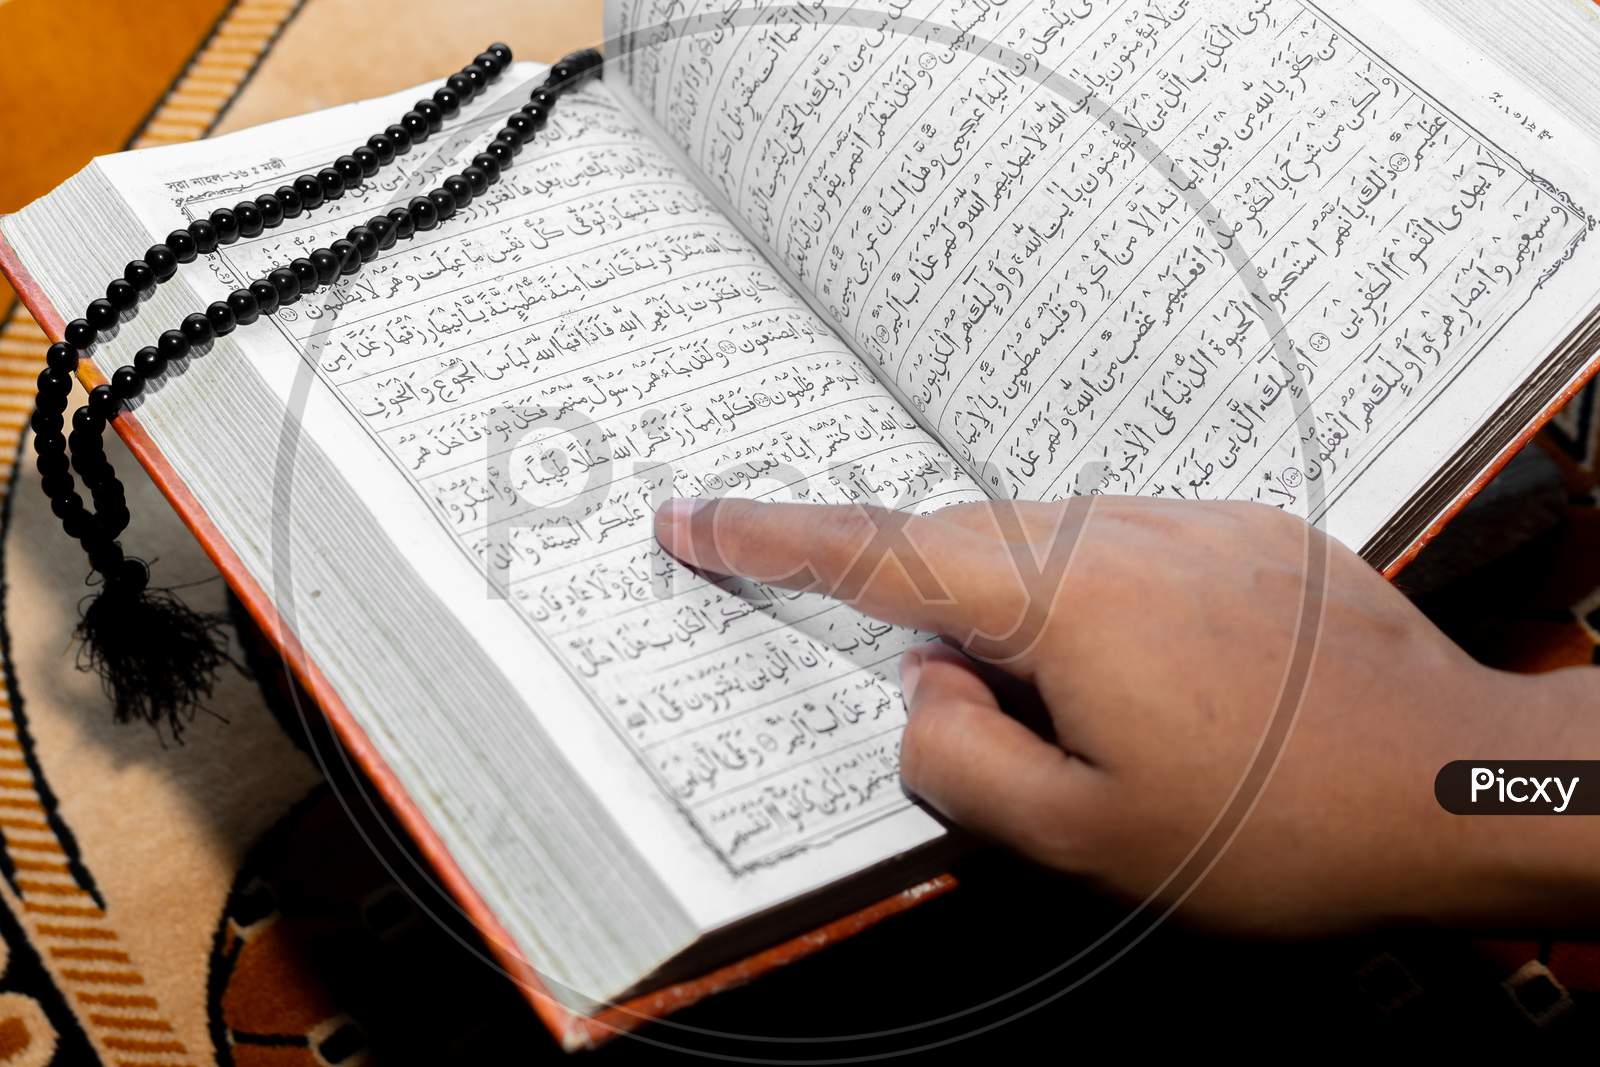 Muslim Woman Reading The Holy Quran Using The Finger. The Holy Quran On The Mat Of Prayers . Close-Up Views. Indoors. Focus On Hands.